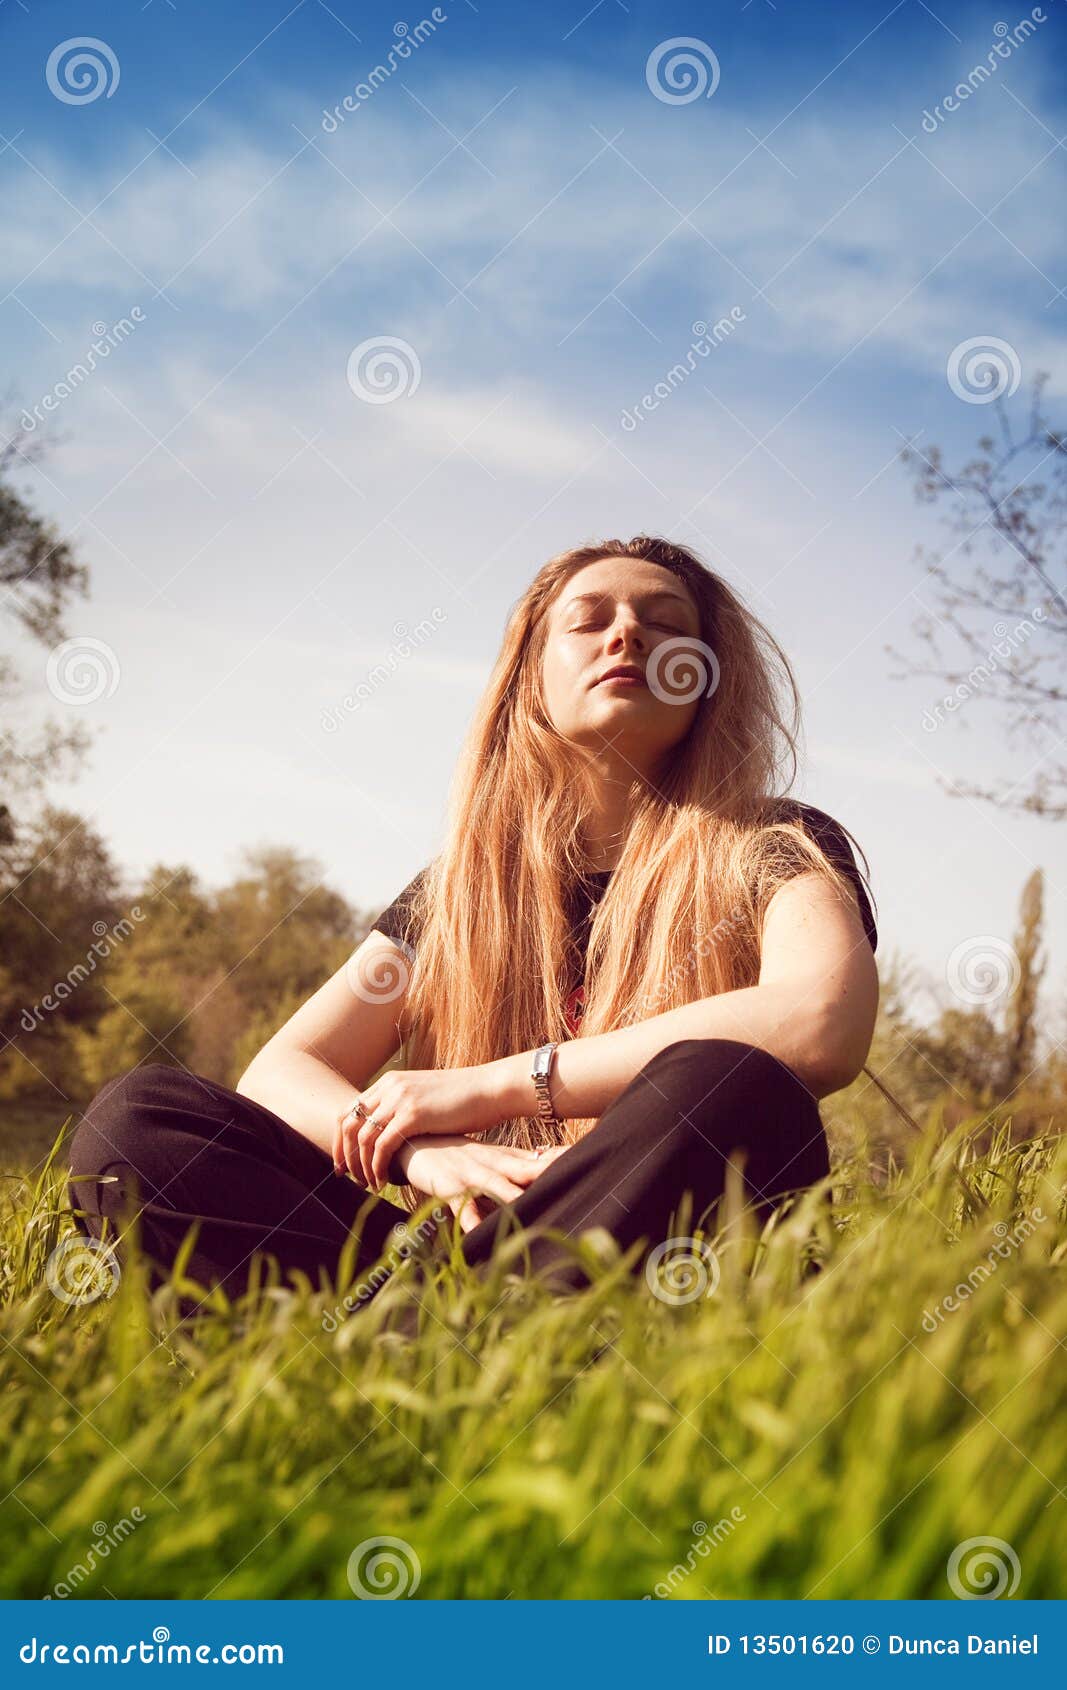 calm woman relaxing in sunny grass field